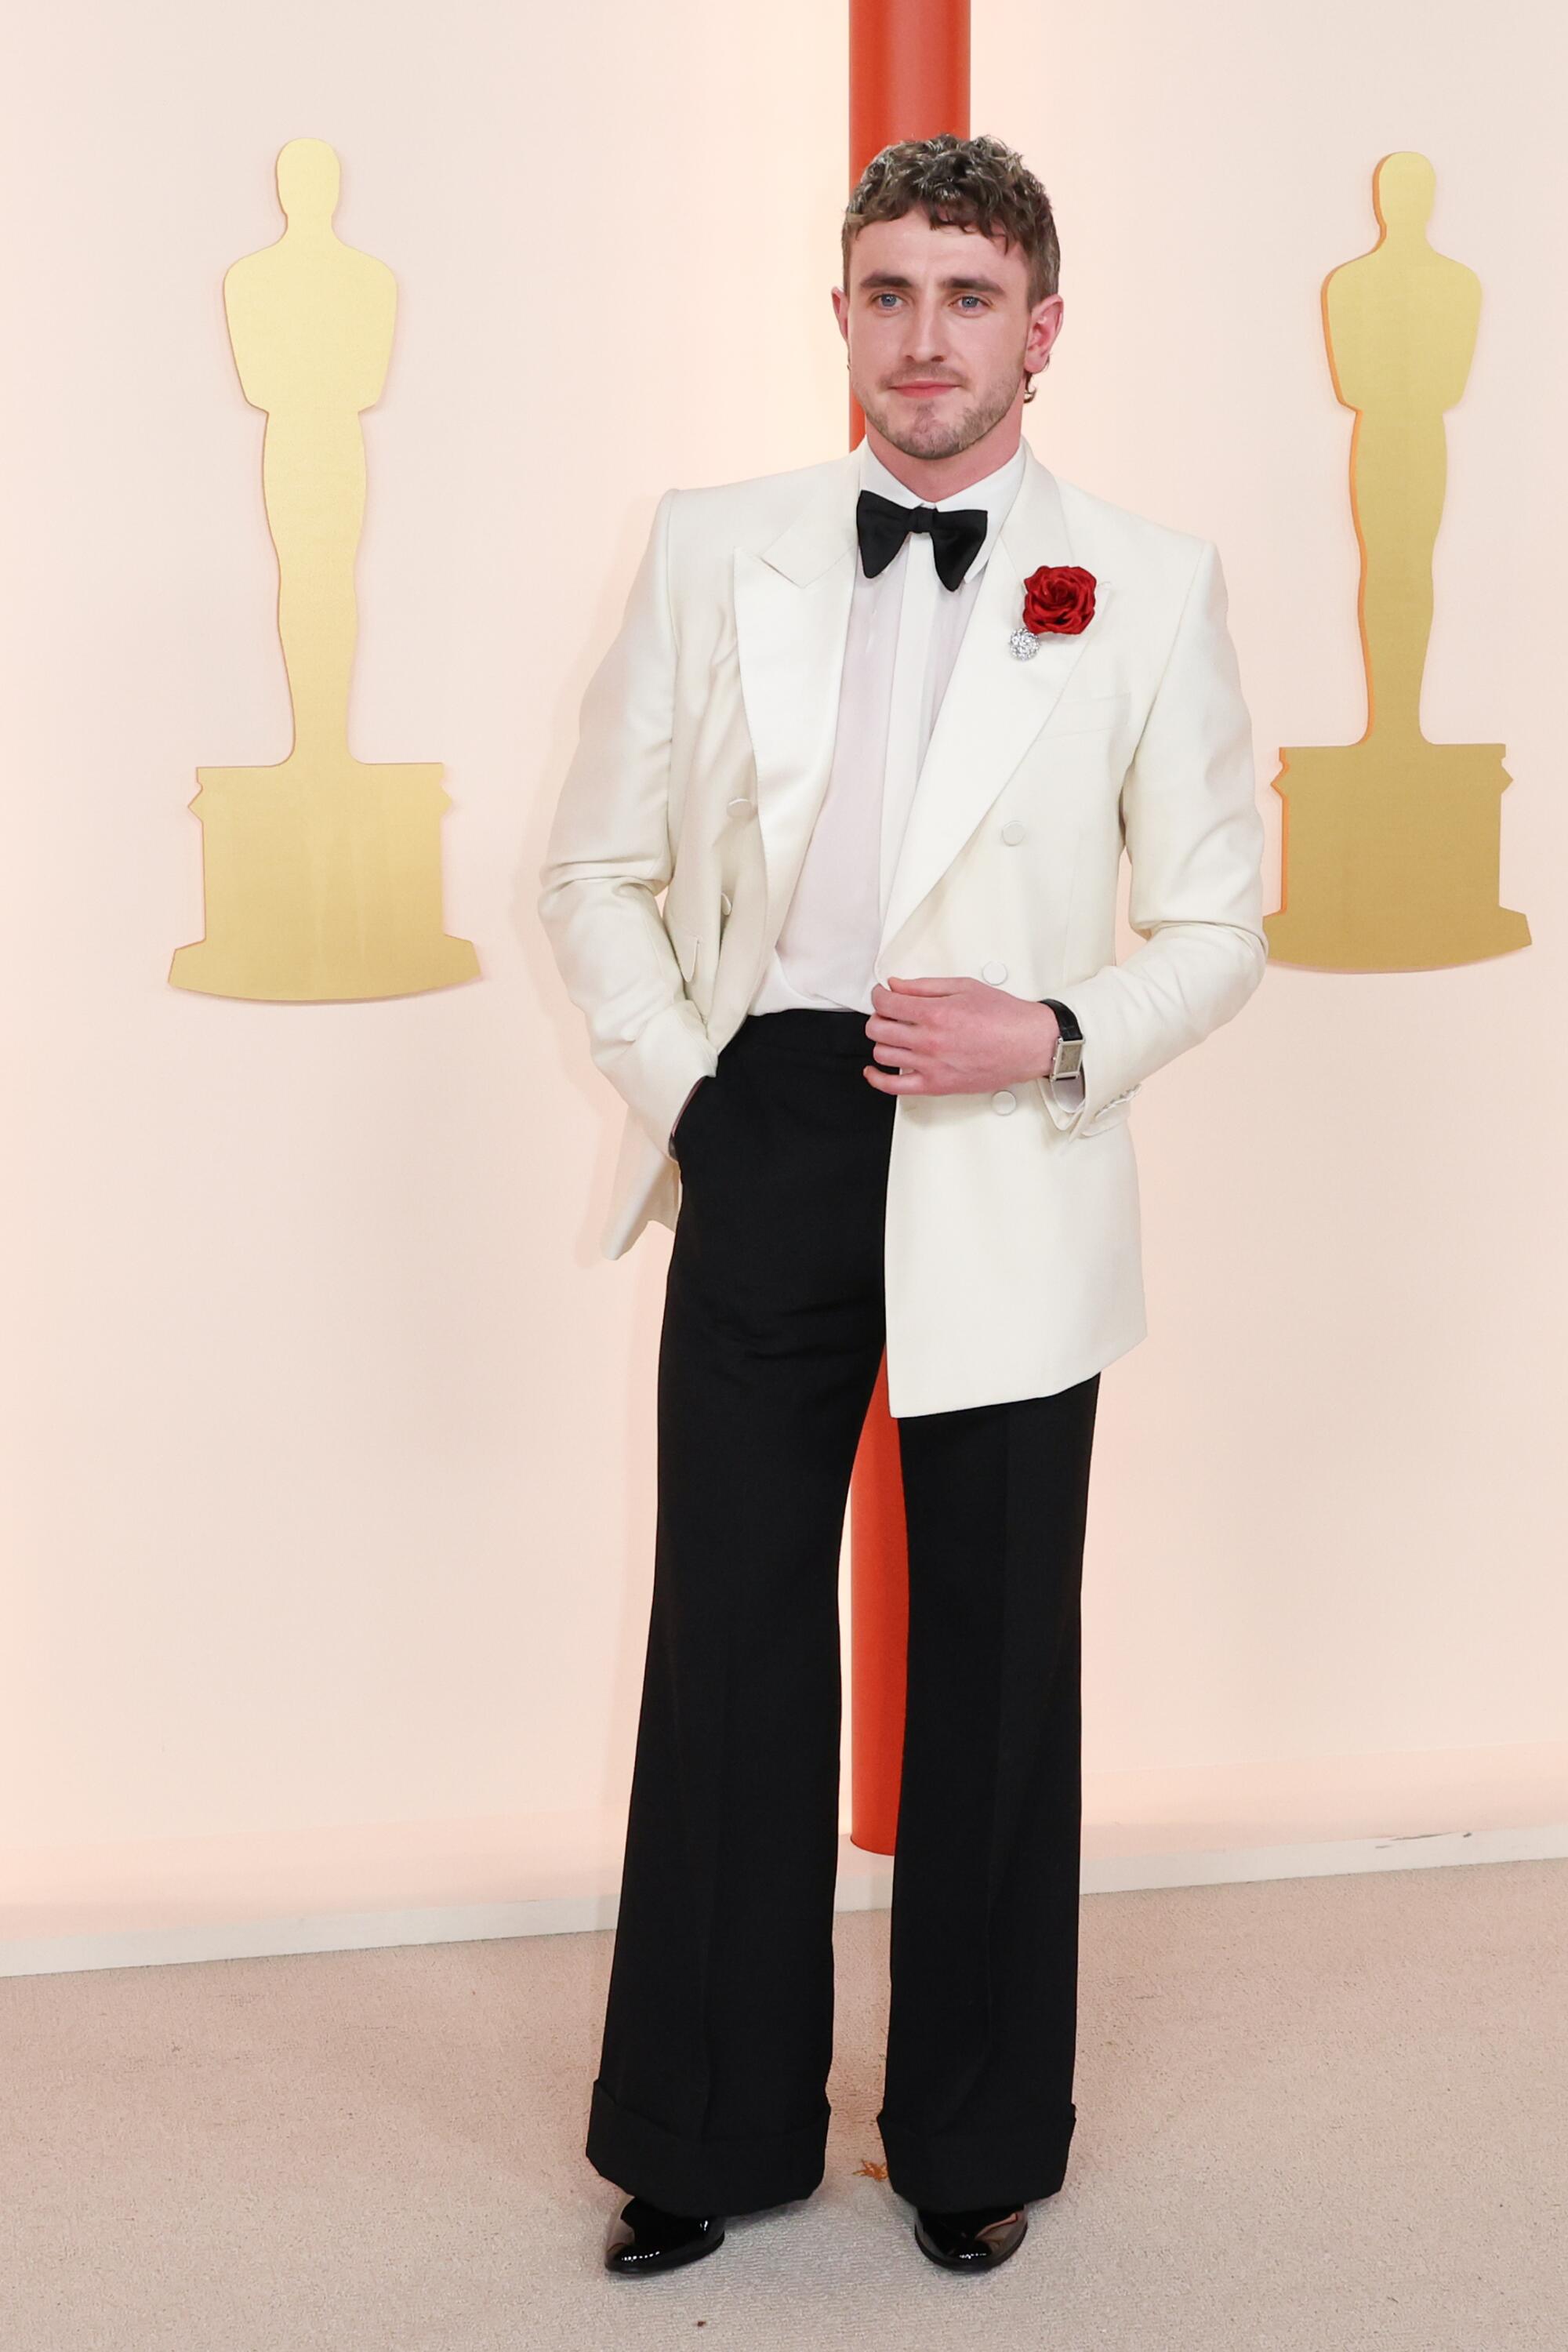 Paul Mescal attends the 95th Academy Awards at the Dolby Theatre on March 12, 2023 in Hollywood, California.